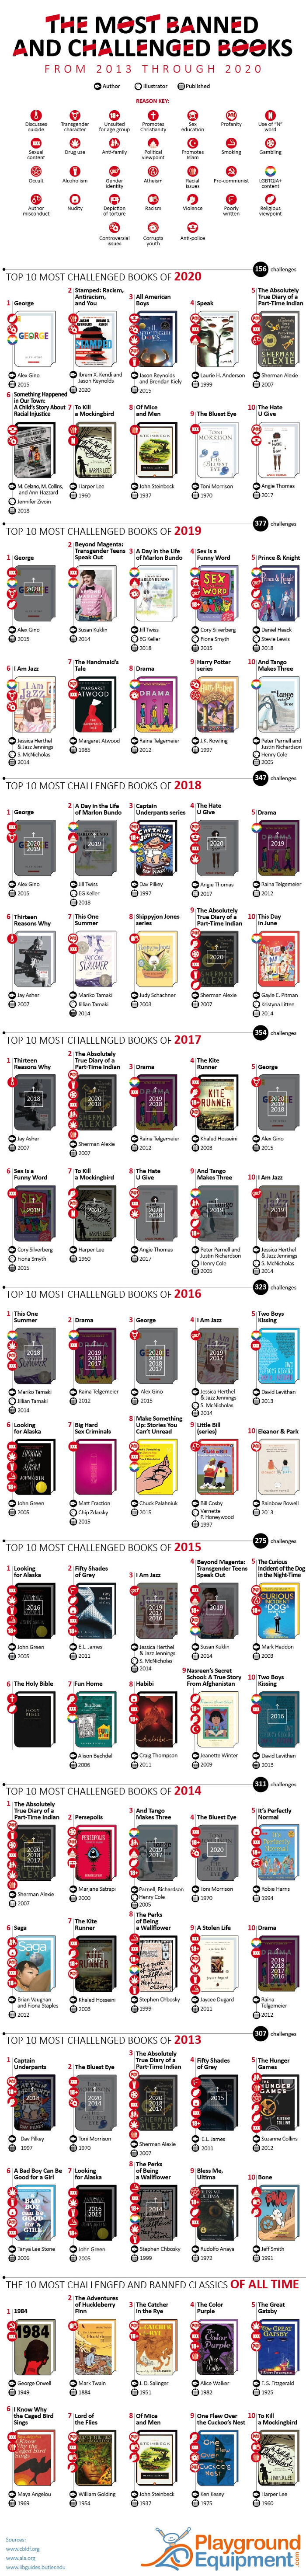 The Most Banned & Challenged Books Of The Last 8 Years